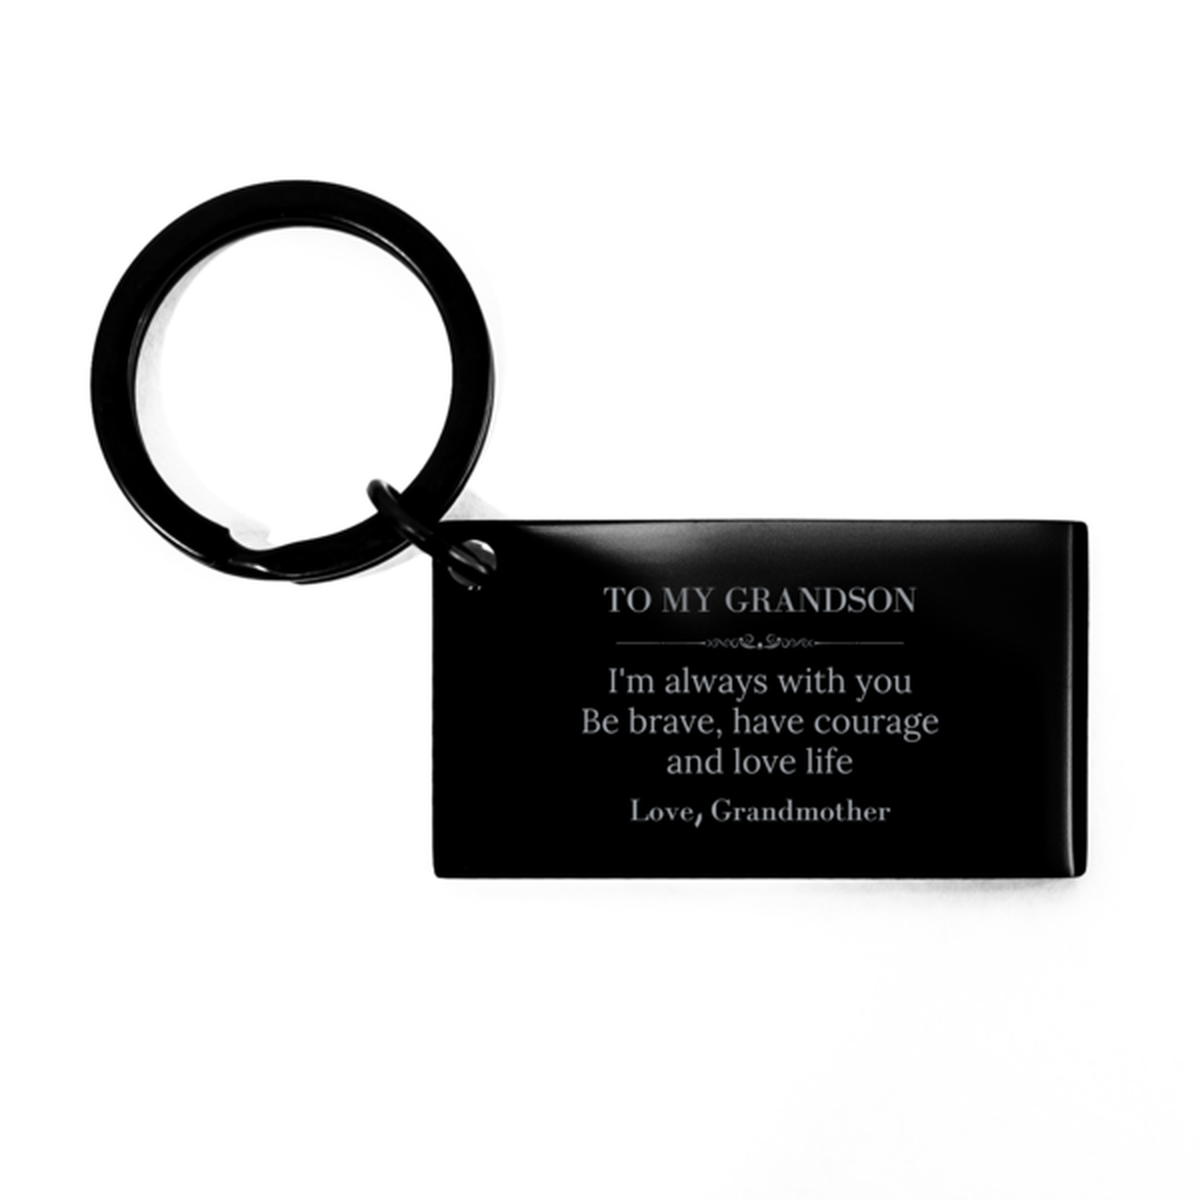 To My Grandson Gifts from Grandmother, Unique Keychain Inspirational Christmas Birthday Graduation Gifts for Grandson I'm always with you. Be brave, have courage and love life. Love, Grandmother